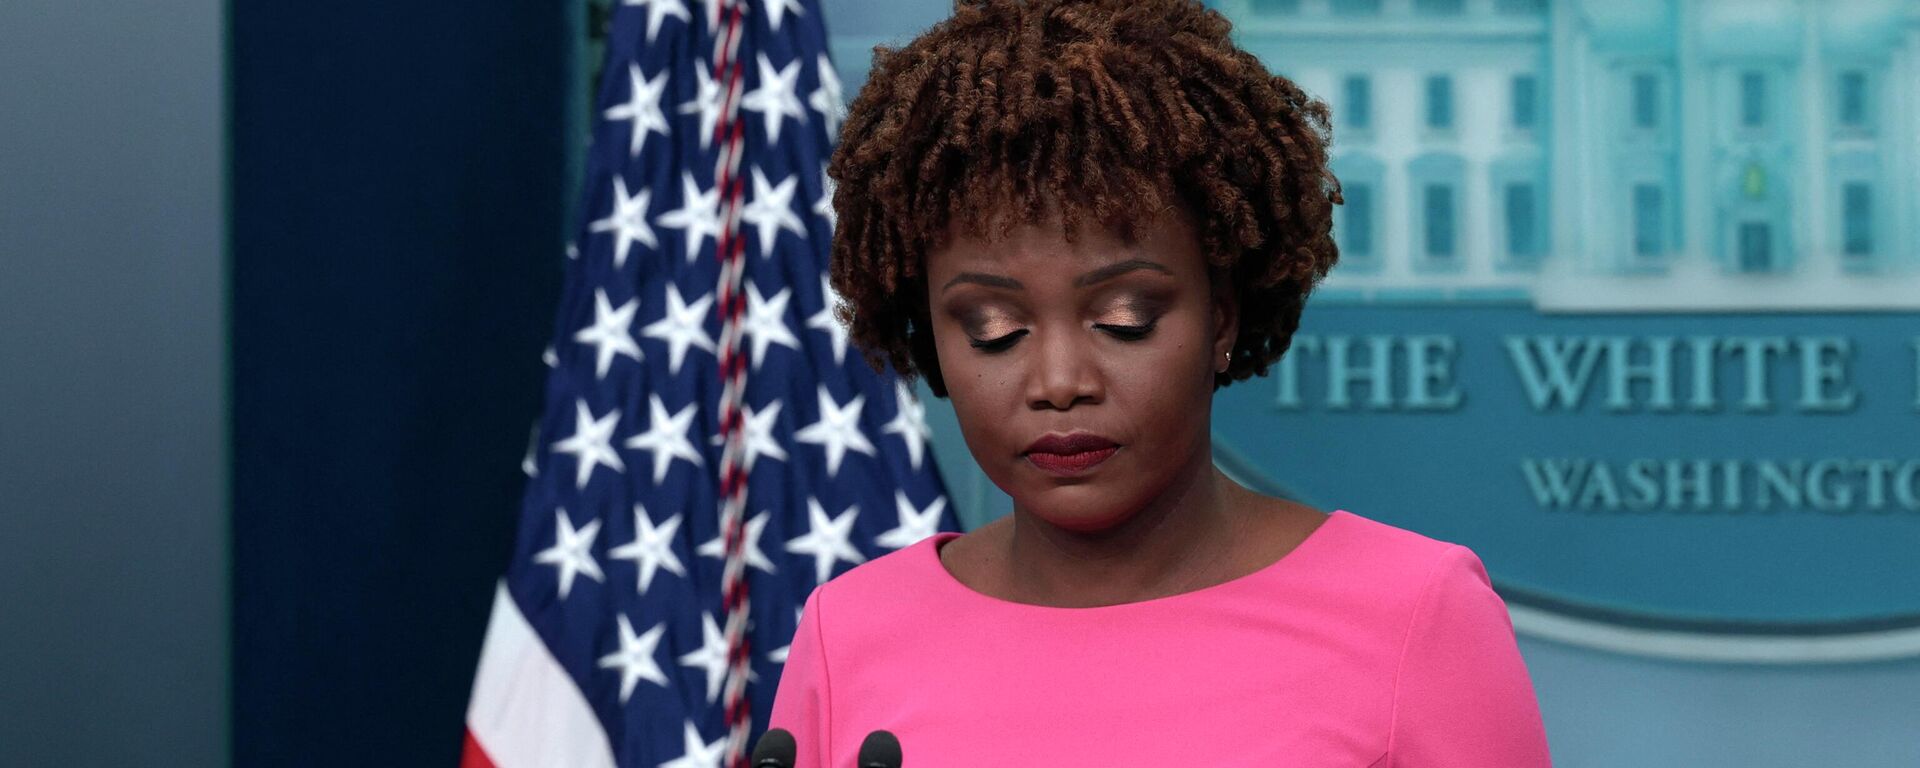 White House Press Secretary Karine Jean-Pierre listens to a question during a daily press briefing at the White House on May 26, 2022 in Washington, DC - Sputnik International, 1920, 06.06.2022